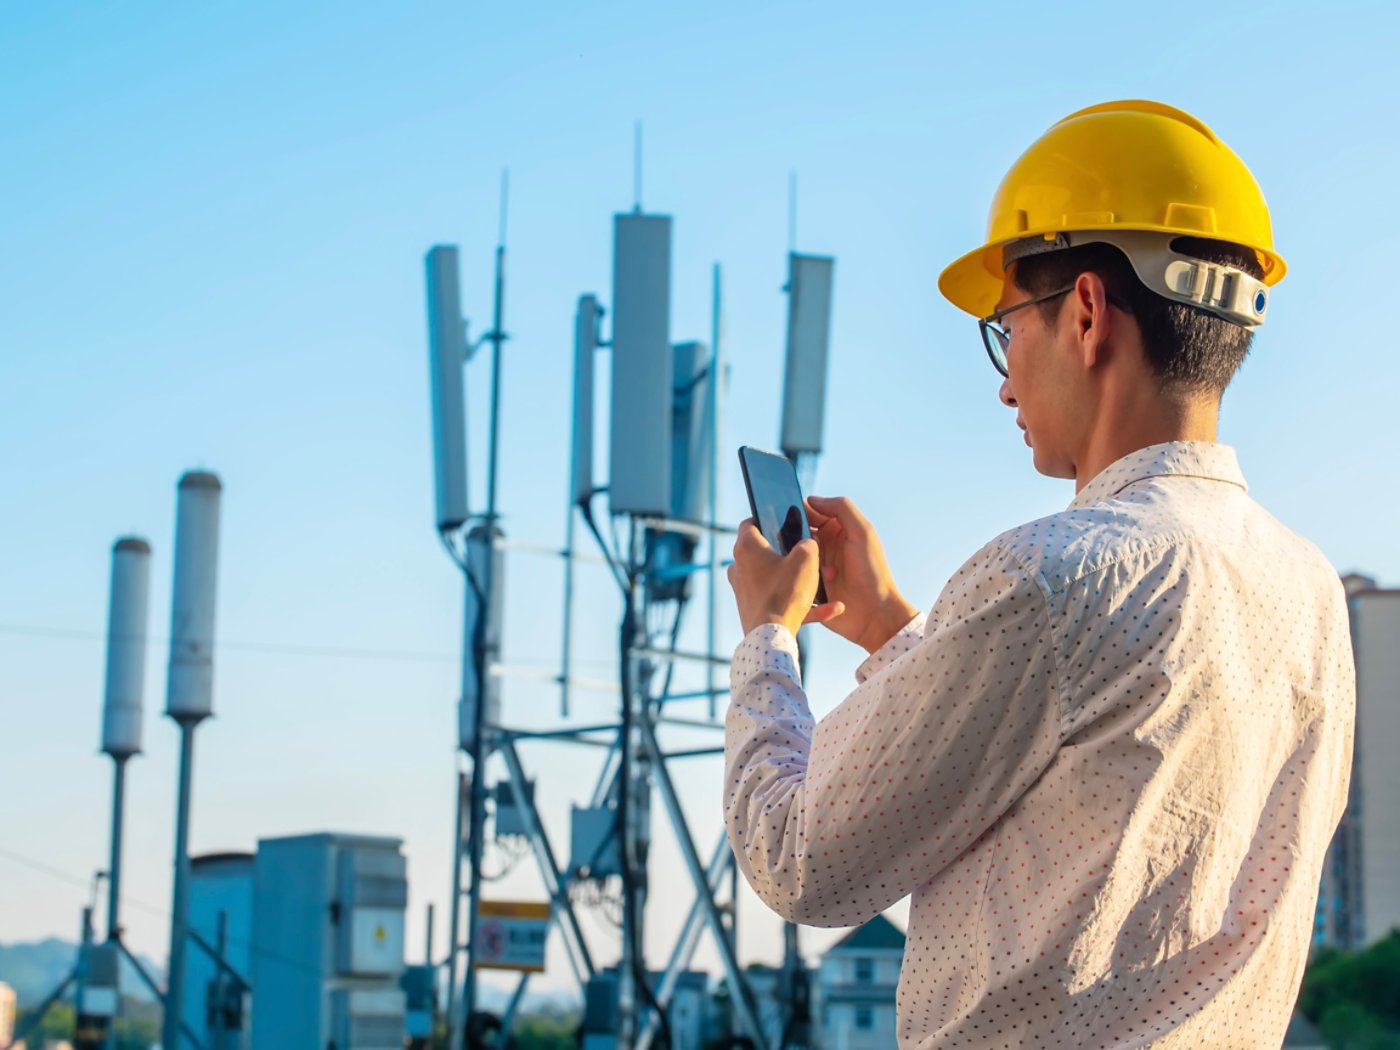 Engineer holding mobile phone testing the communications tower